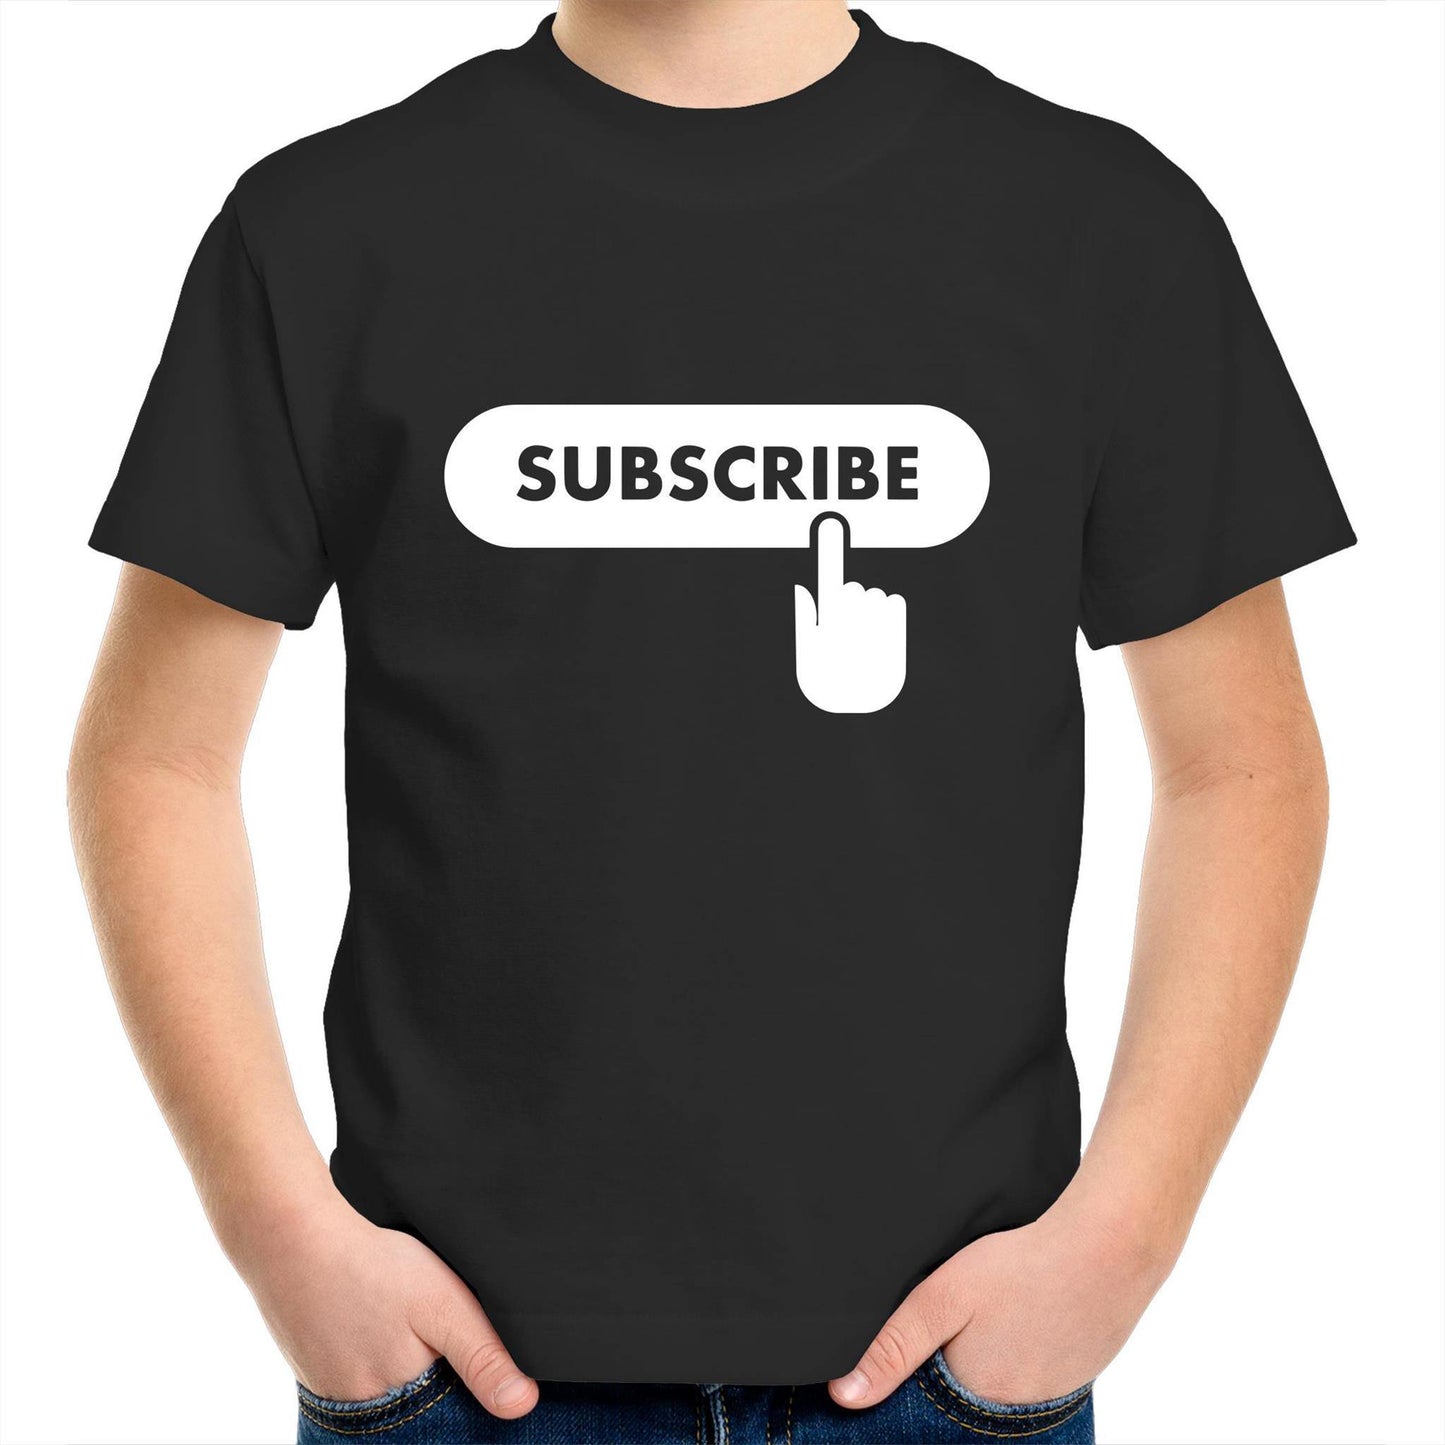 Subscribe - Kids Youth Crew T-Shirt Black Kids Youth T-shirt Funny